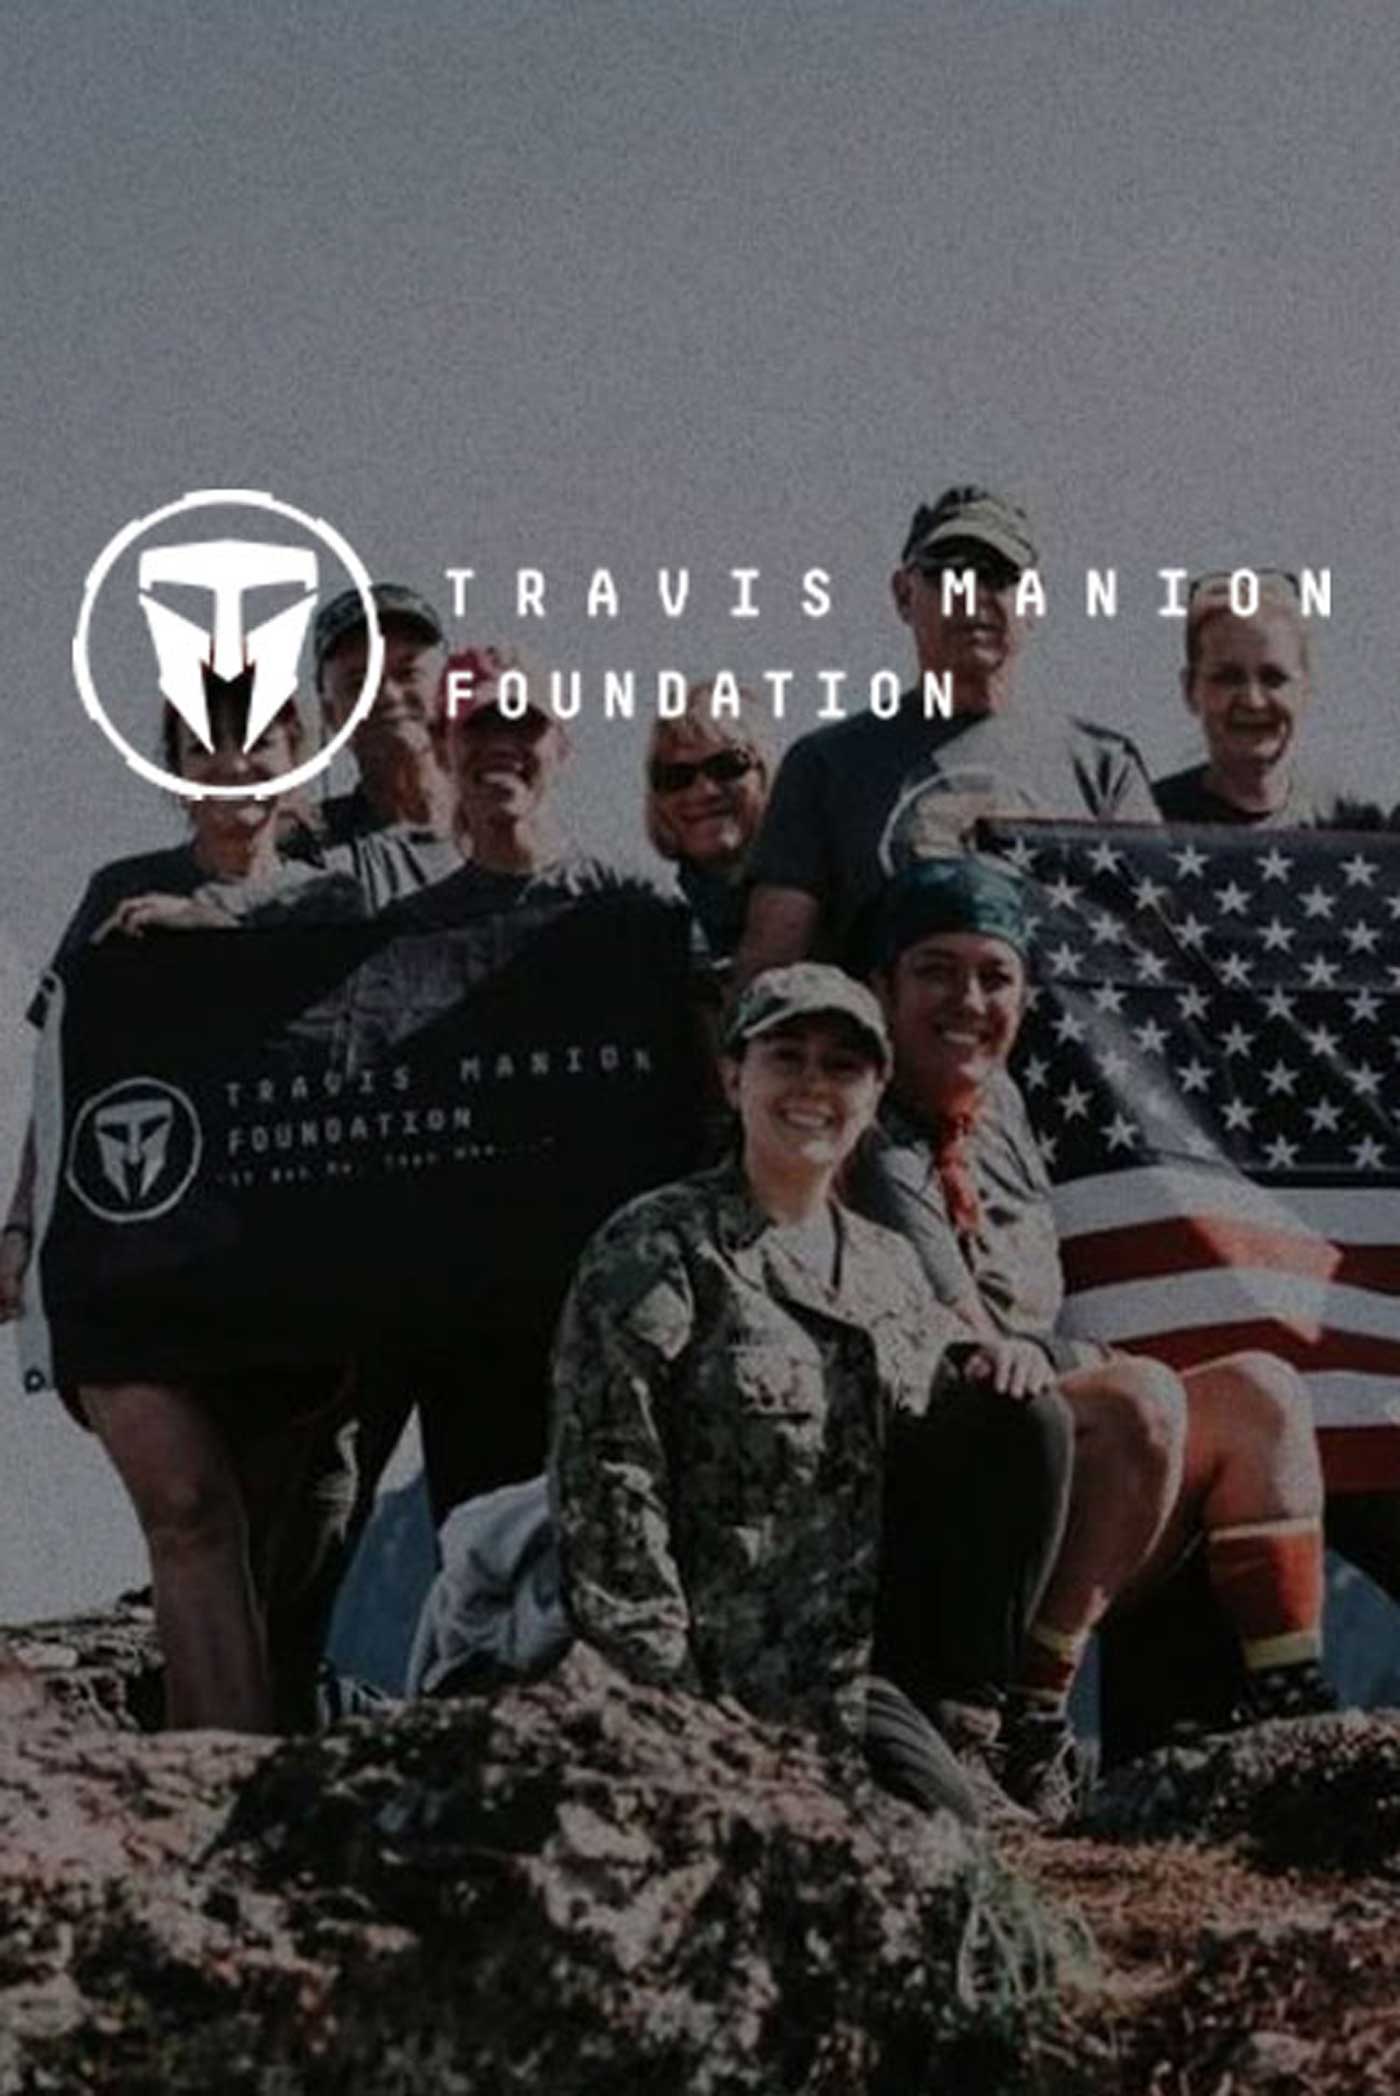 A group of excited people stand atop a mountain holding the United States of America Flag and the Travis Manion Foundation Flag. The Travis Manion Foundation logo overlays on top of the image.